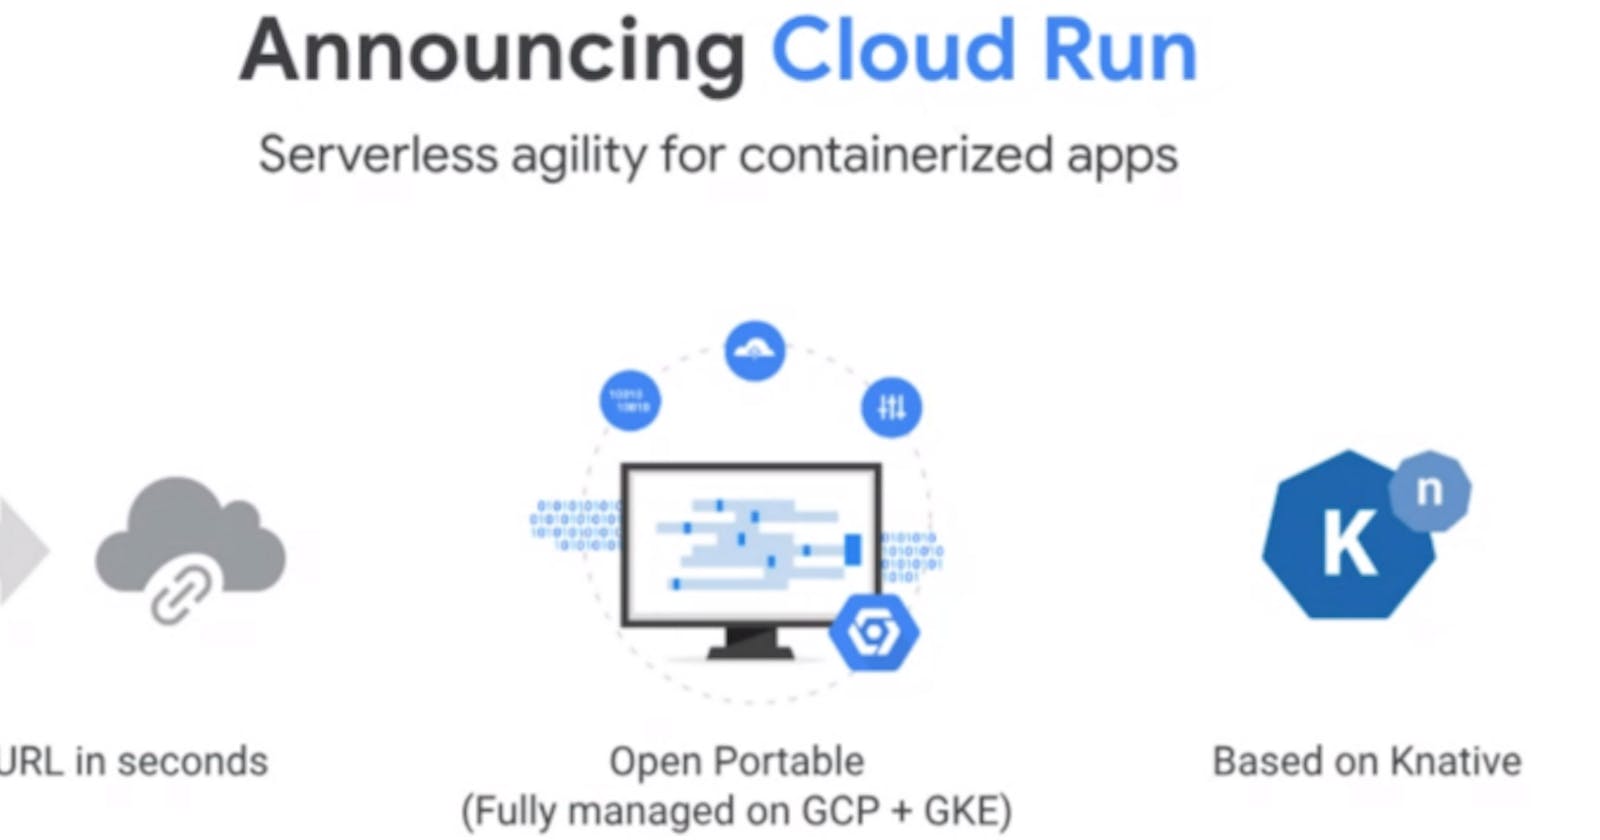 Google Cloud Run — Deploying Containerized Applications to a Serverless Environment ⚡